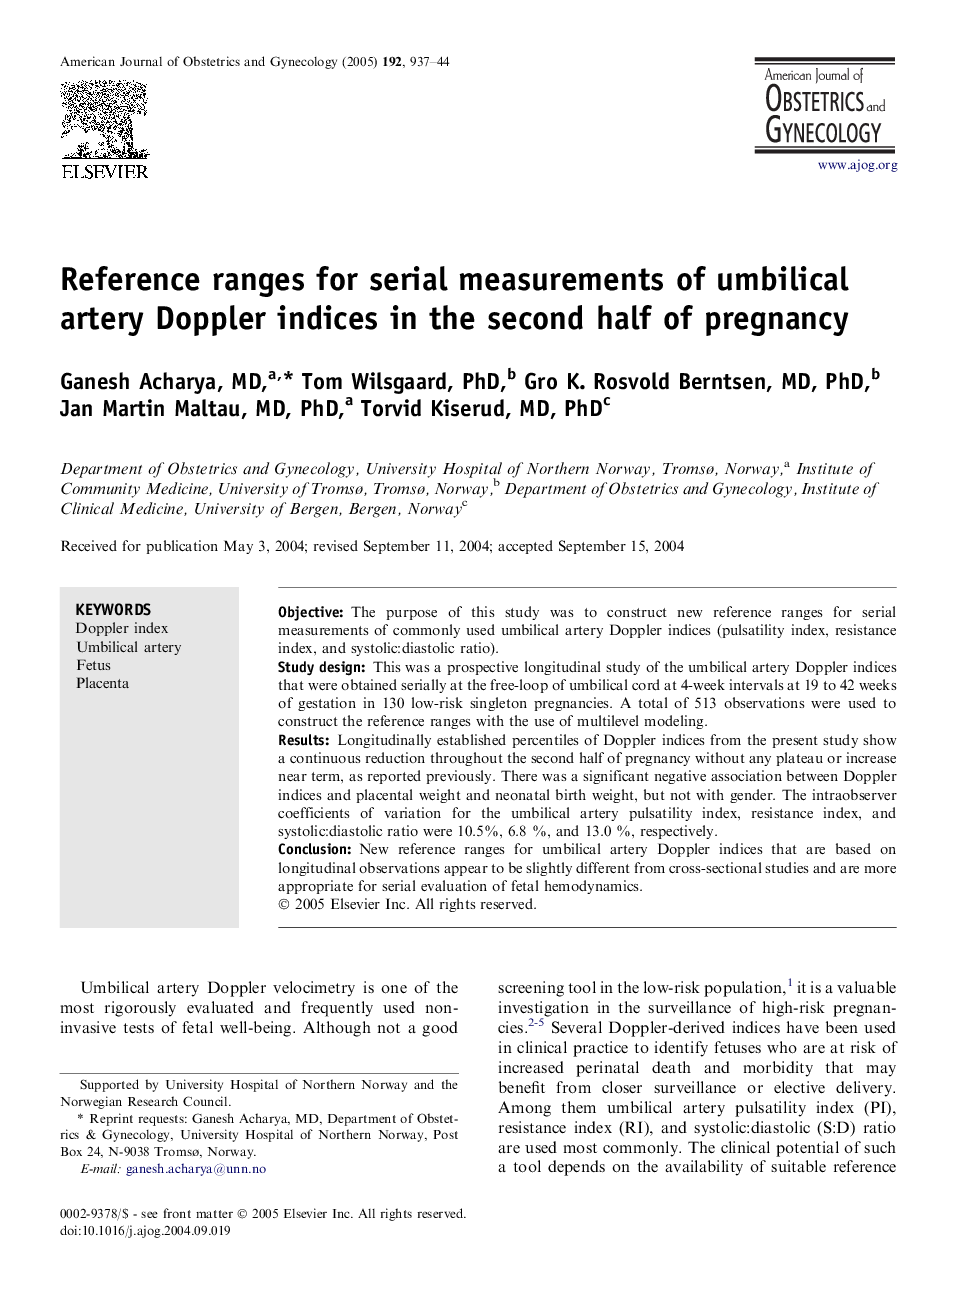 Reference ranges for serial measurements of umbilical artery Doppler indices in the second half of pregnancy